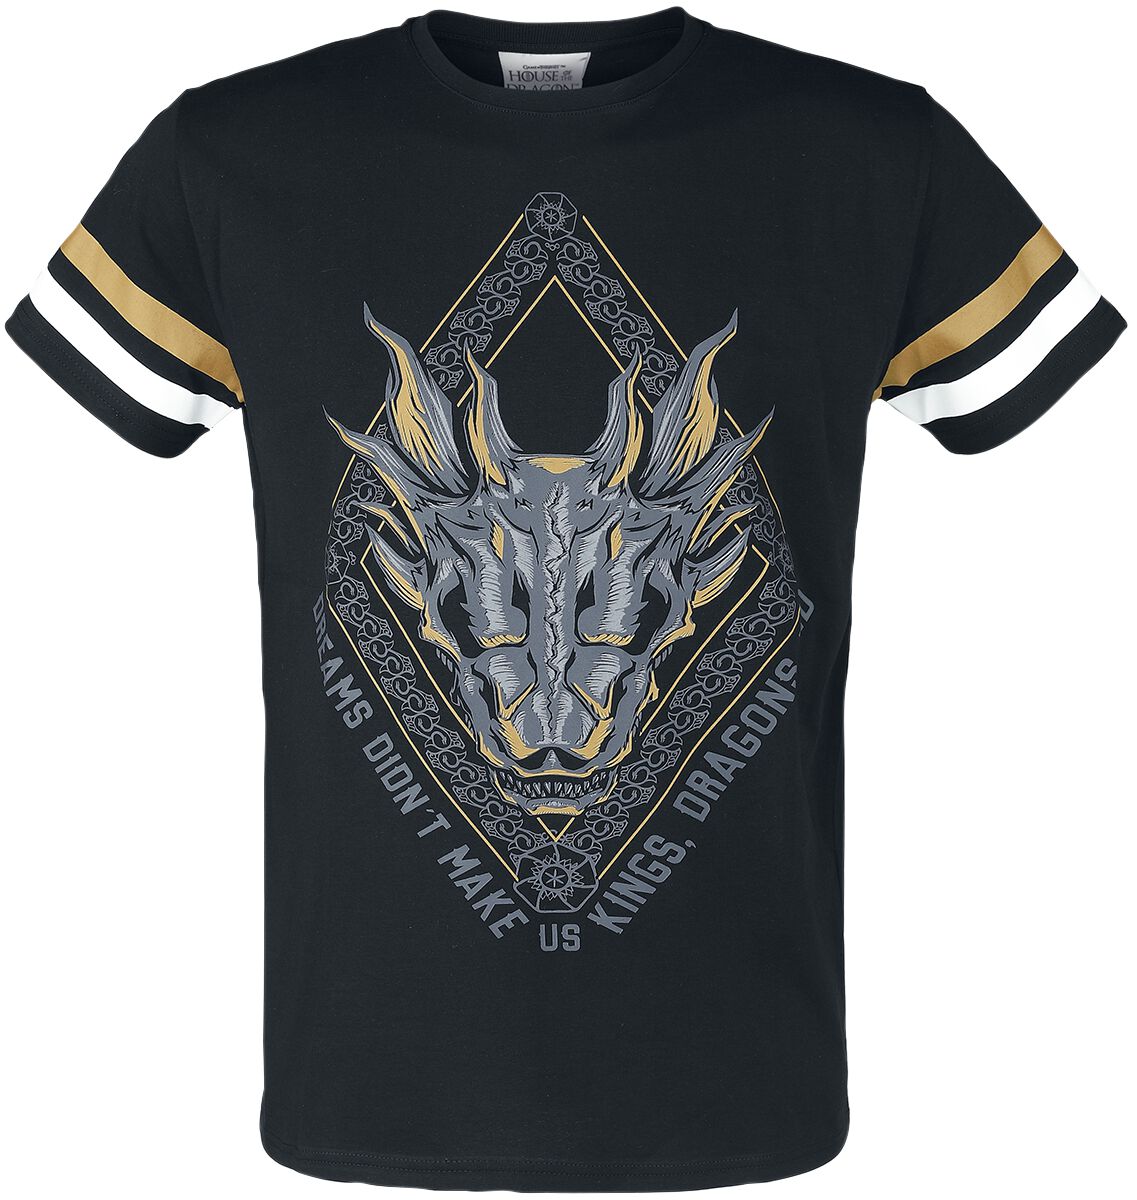 Game of Thrones House of the Dragon - Make kings T-Shirt black